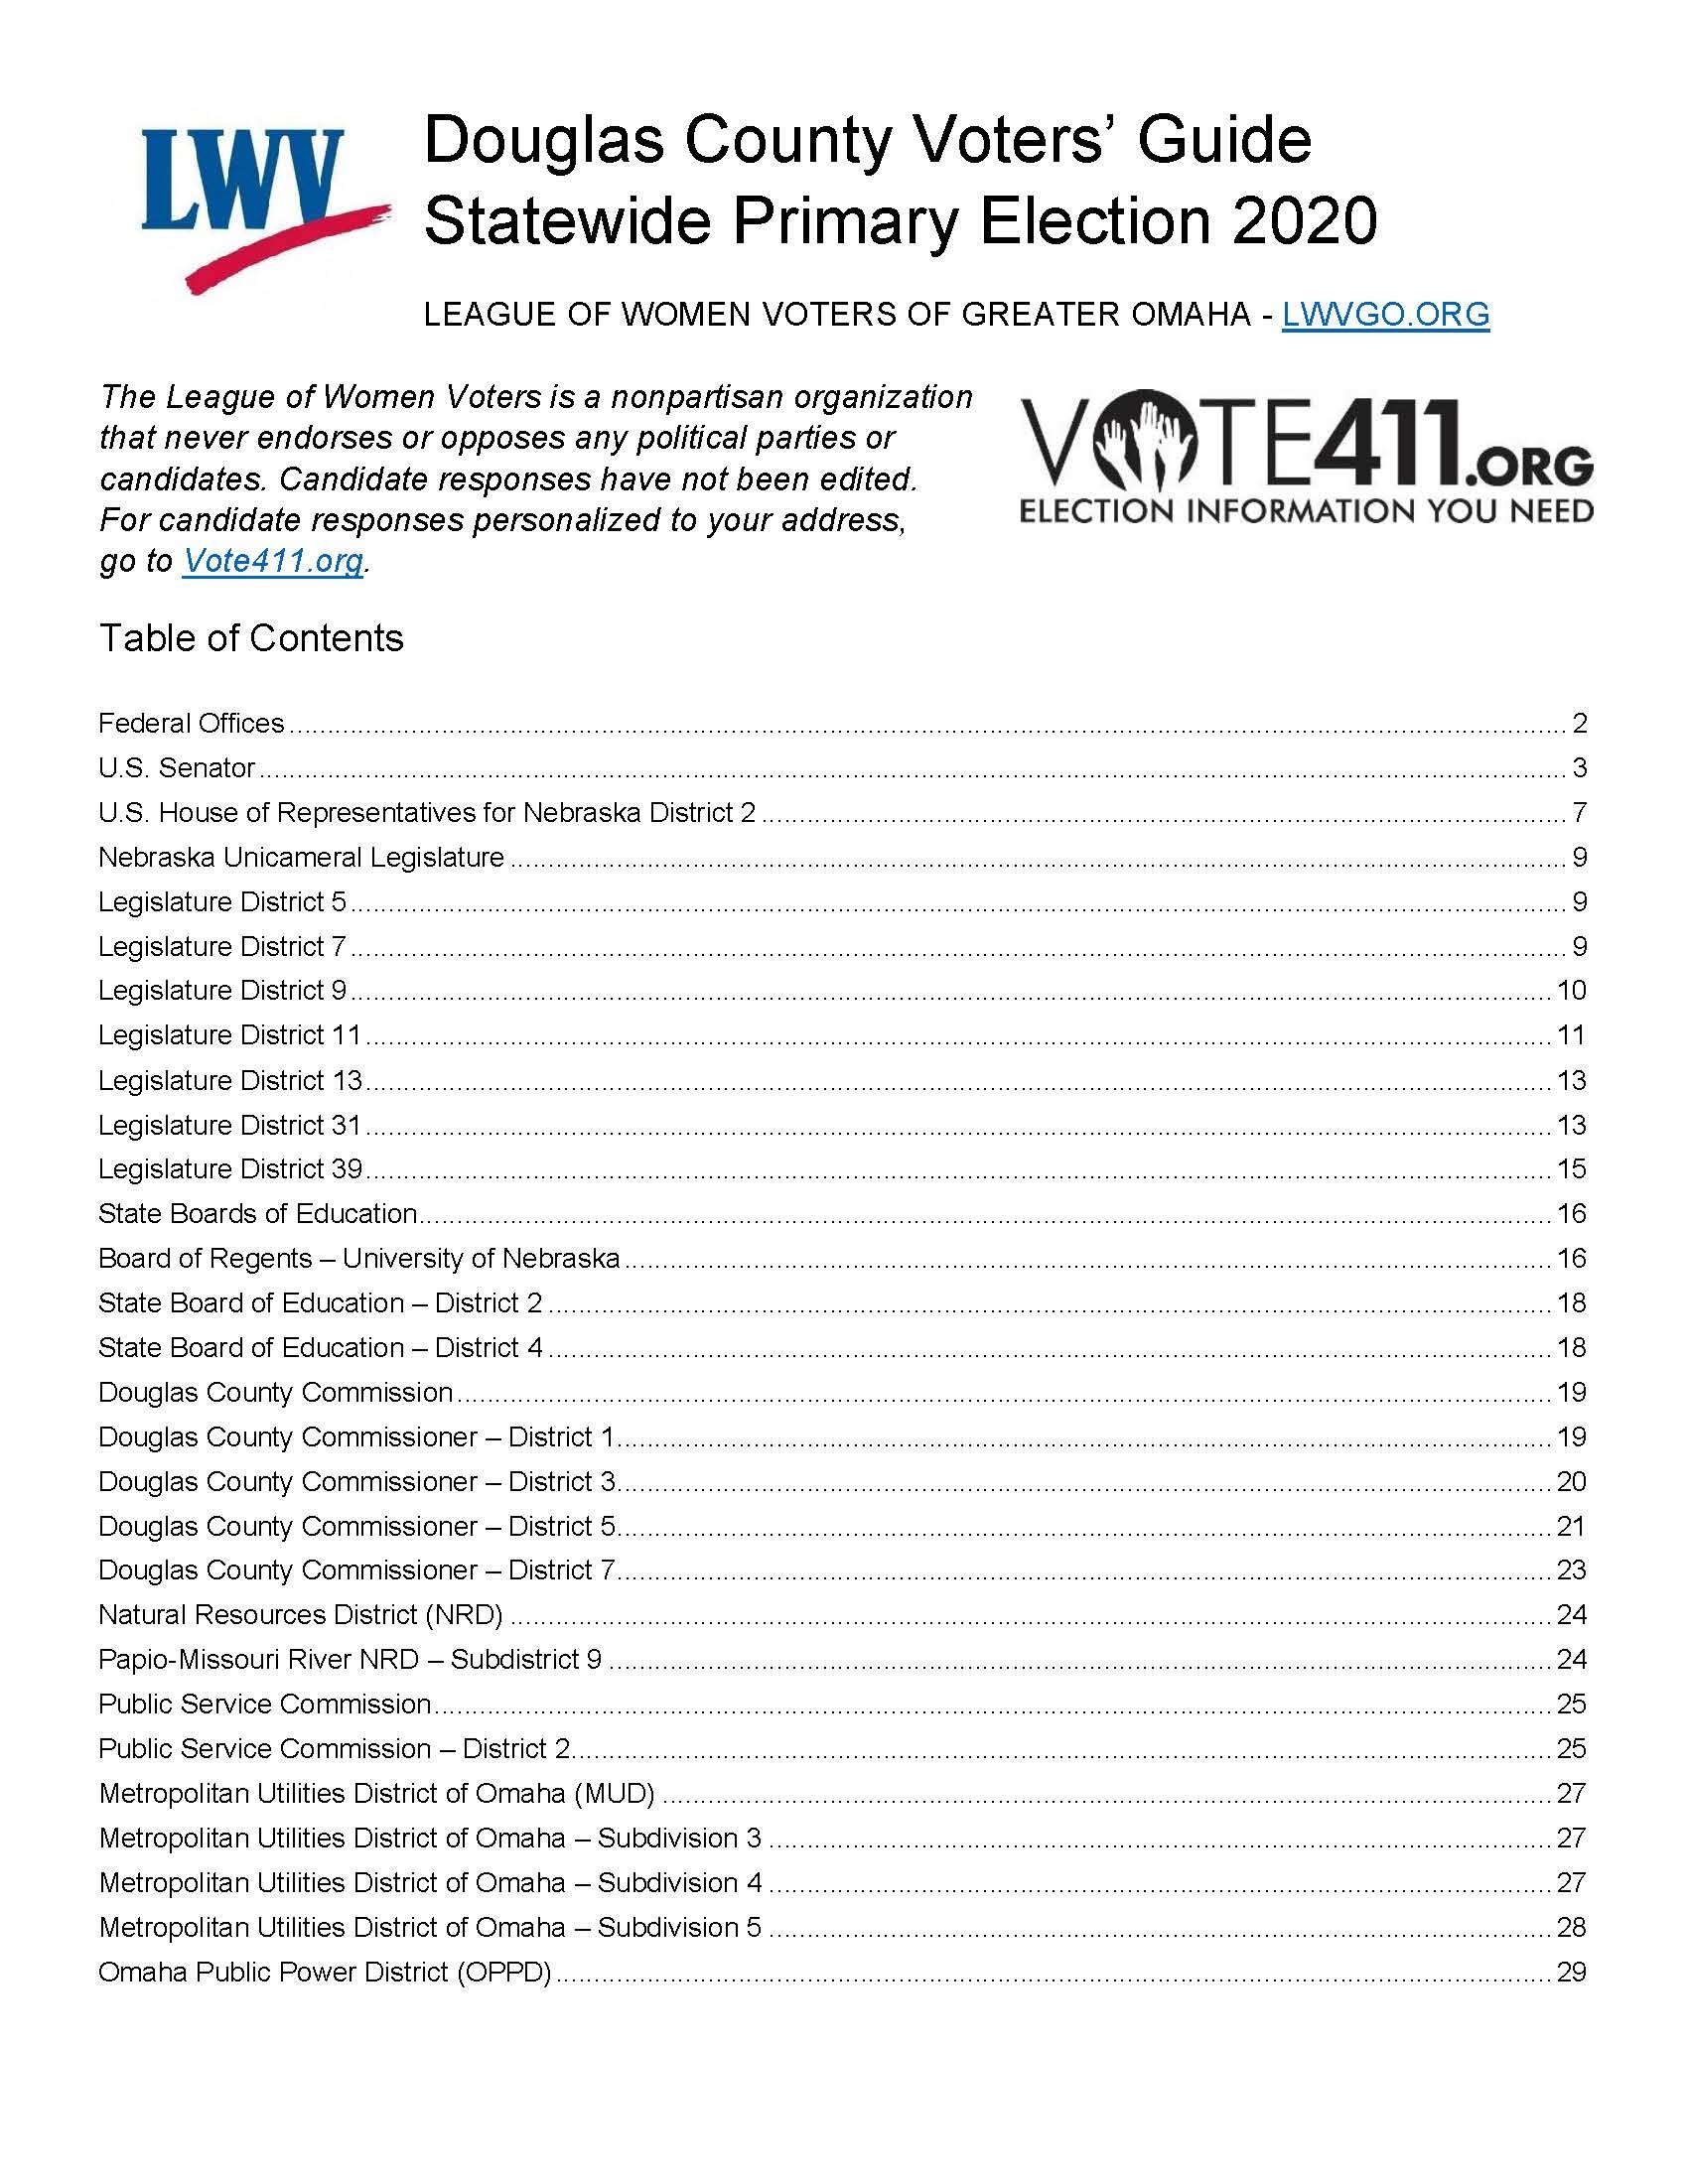 2020-Primary-Voters-Guide-LWVGO_0_Page_01.jpg